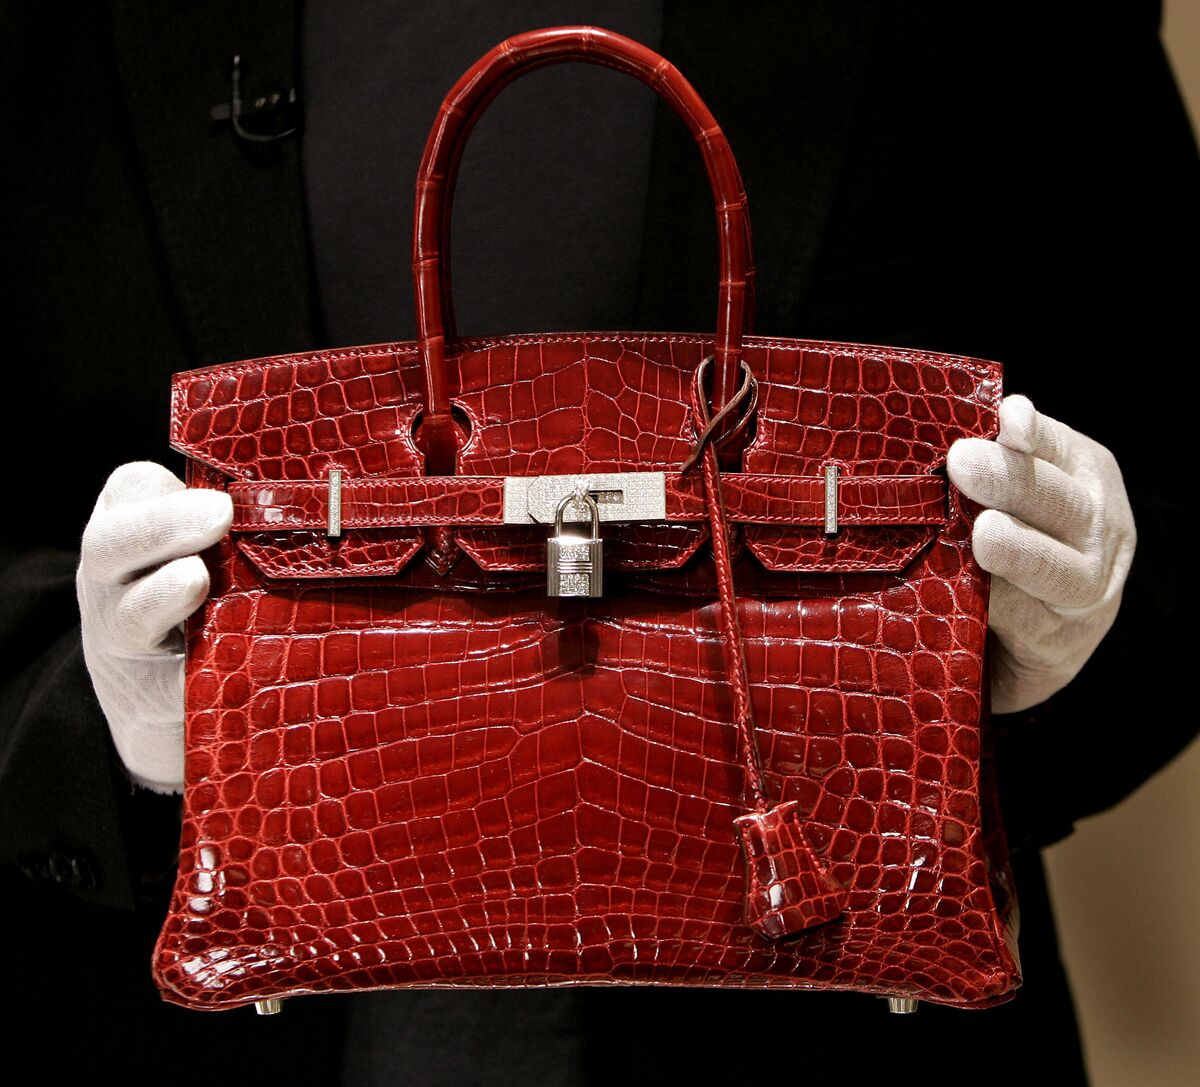 The iconic red, white and blue bag in HK - now reinvented